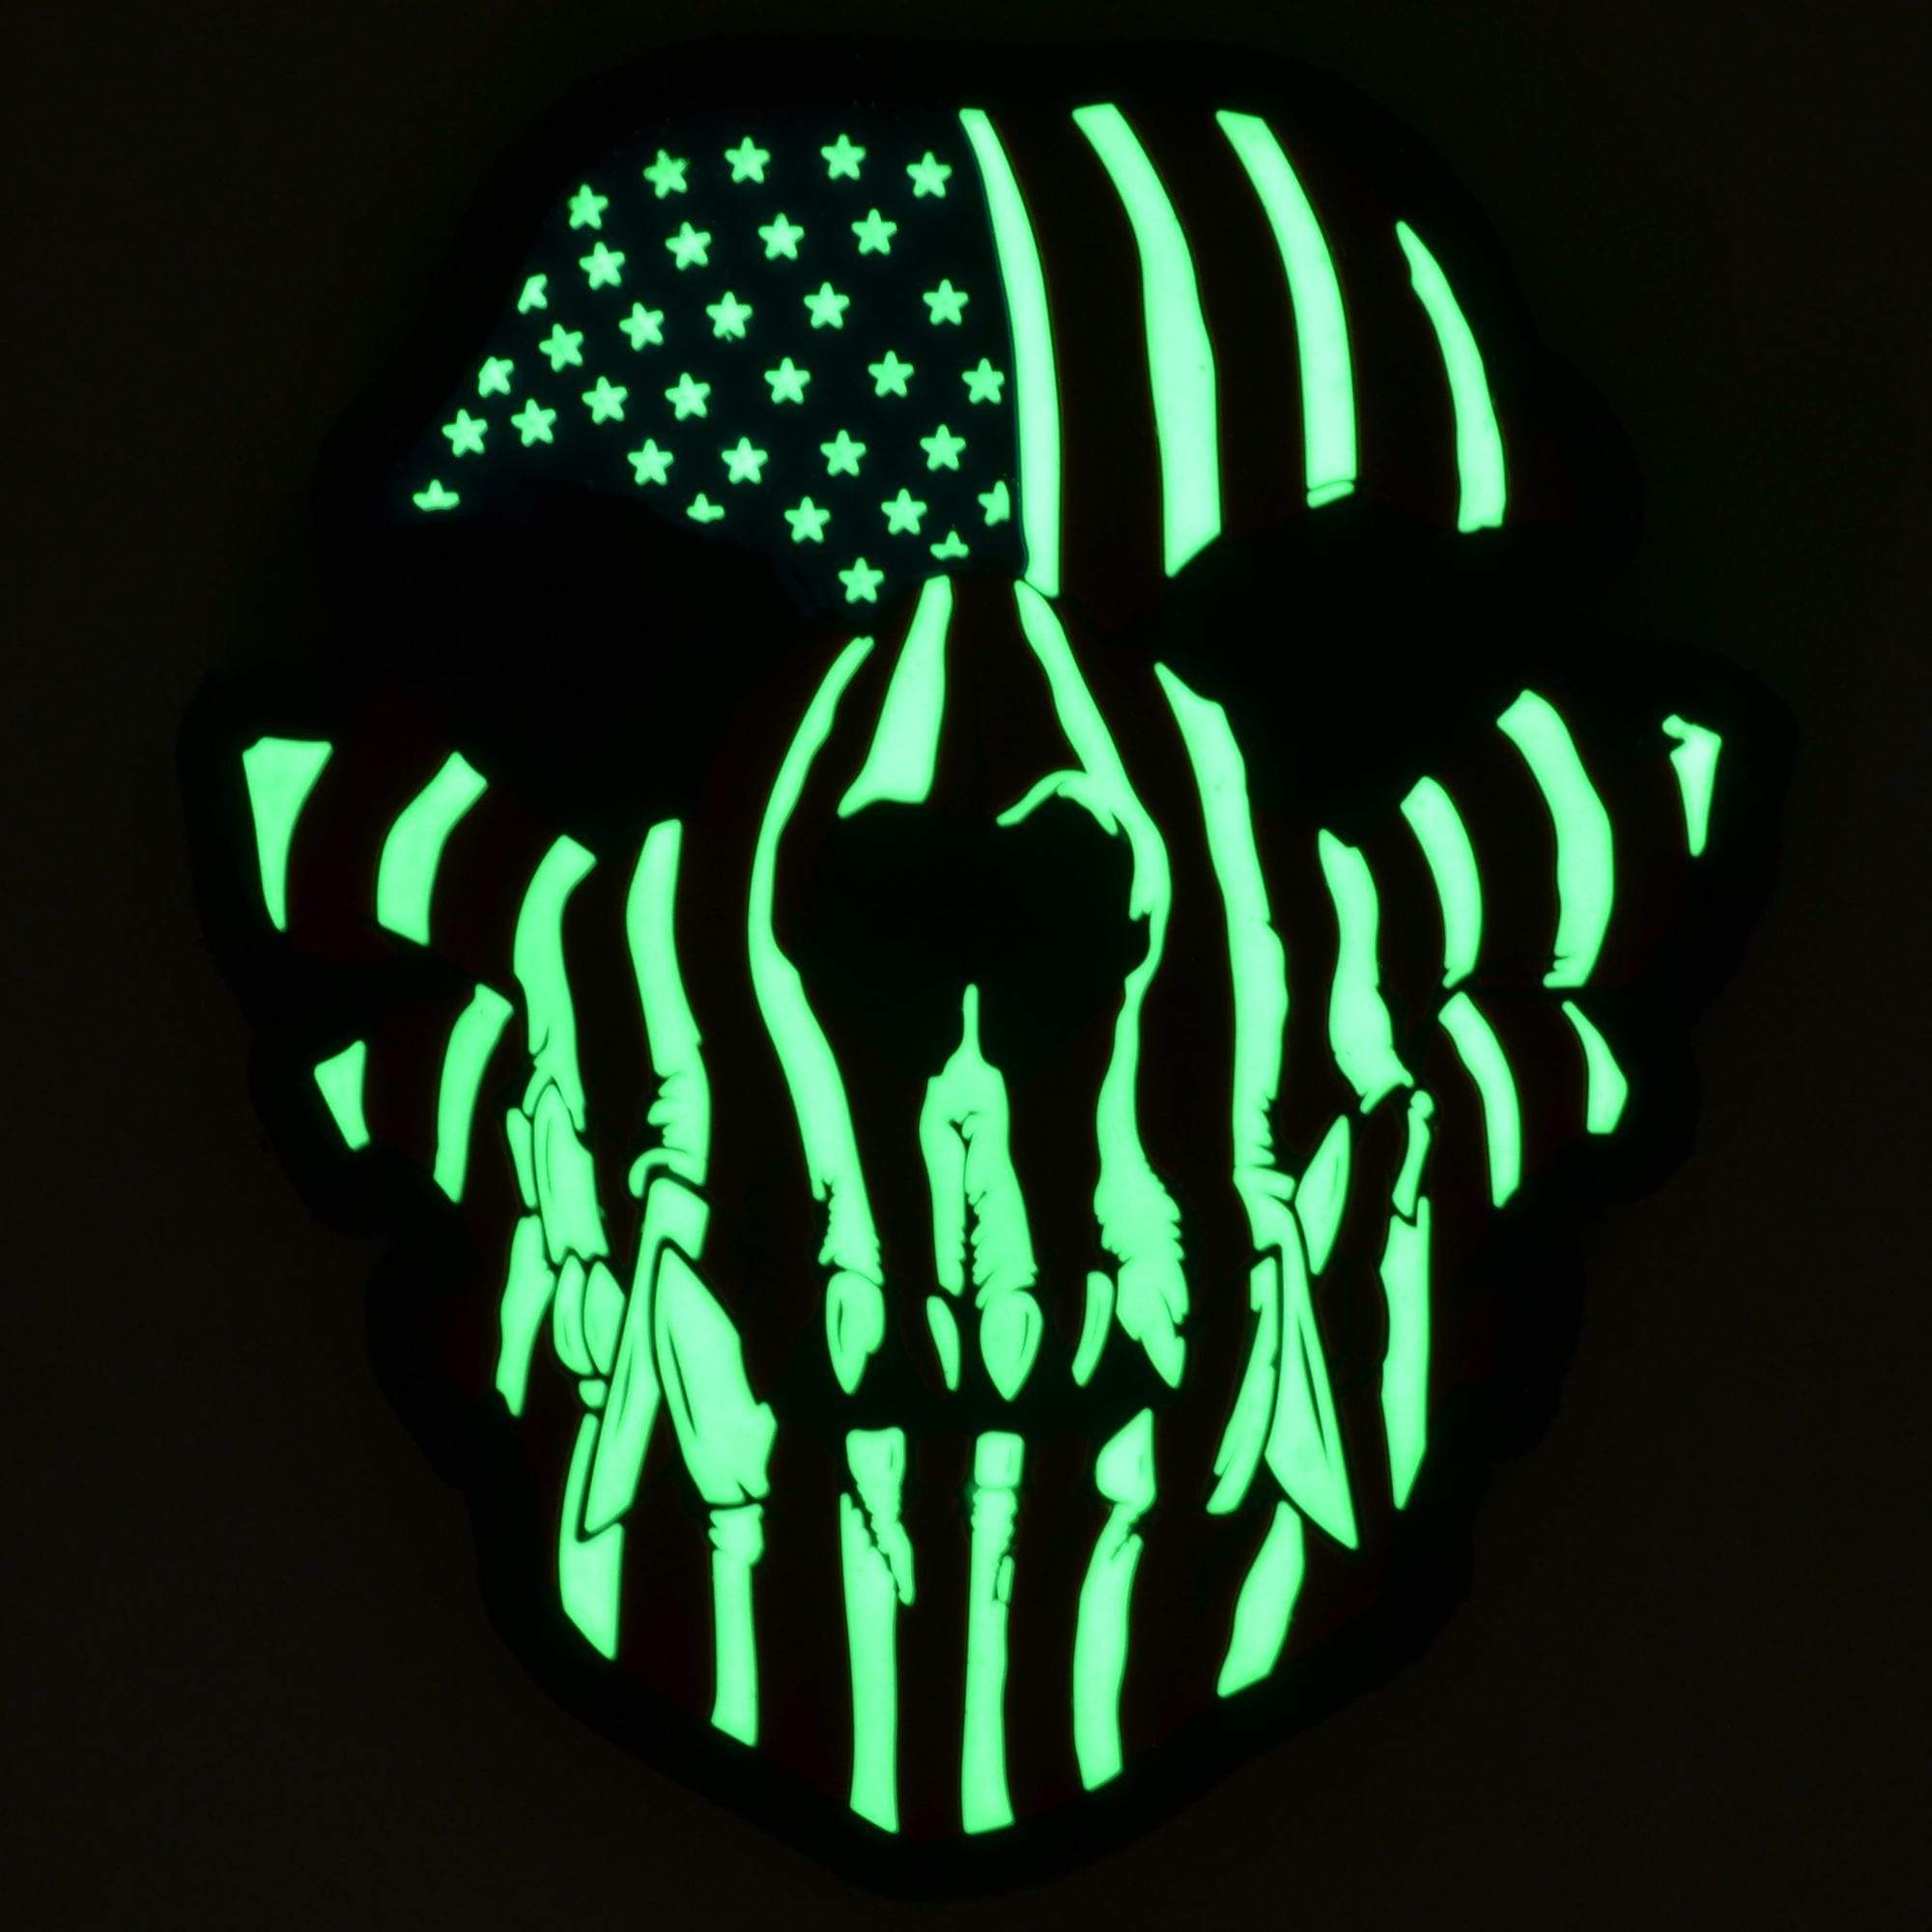 Tactical Gear Junkie Patches Glow in the Dark Canine Skull US Flag - 3x3.5 PVC Patch